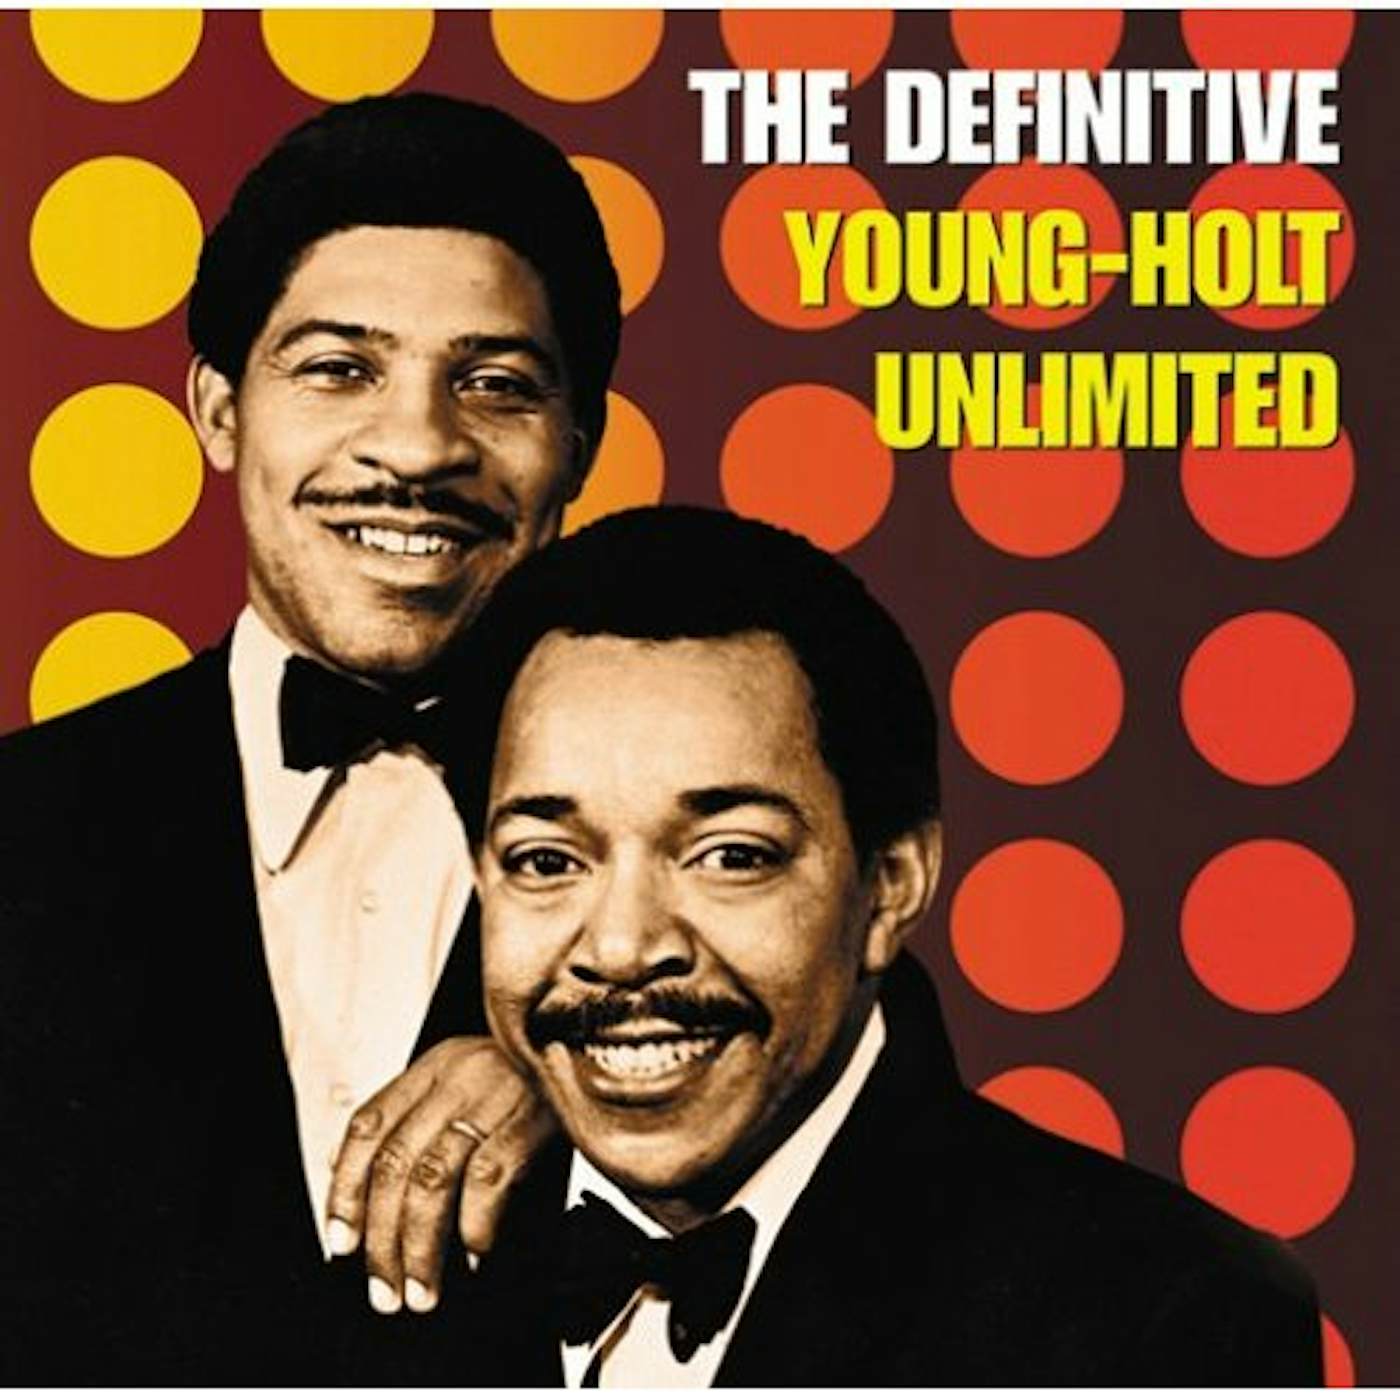 DEFINITIVE YOUNG-HOLT UNLIMITED CD